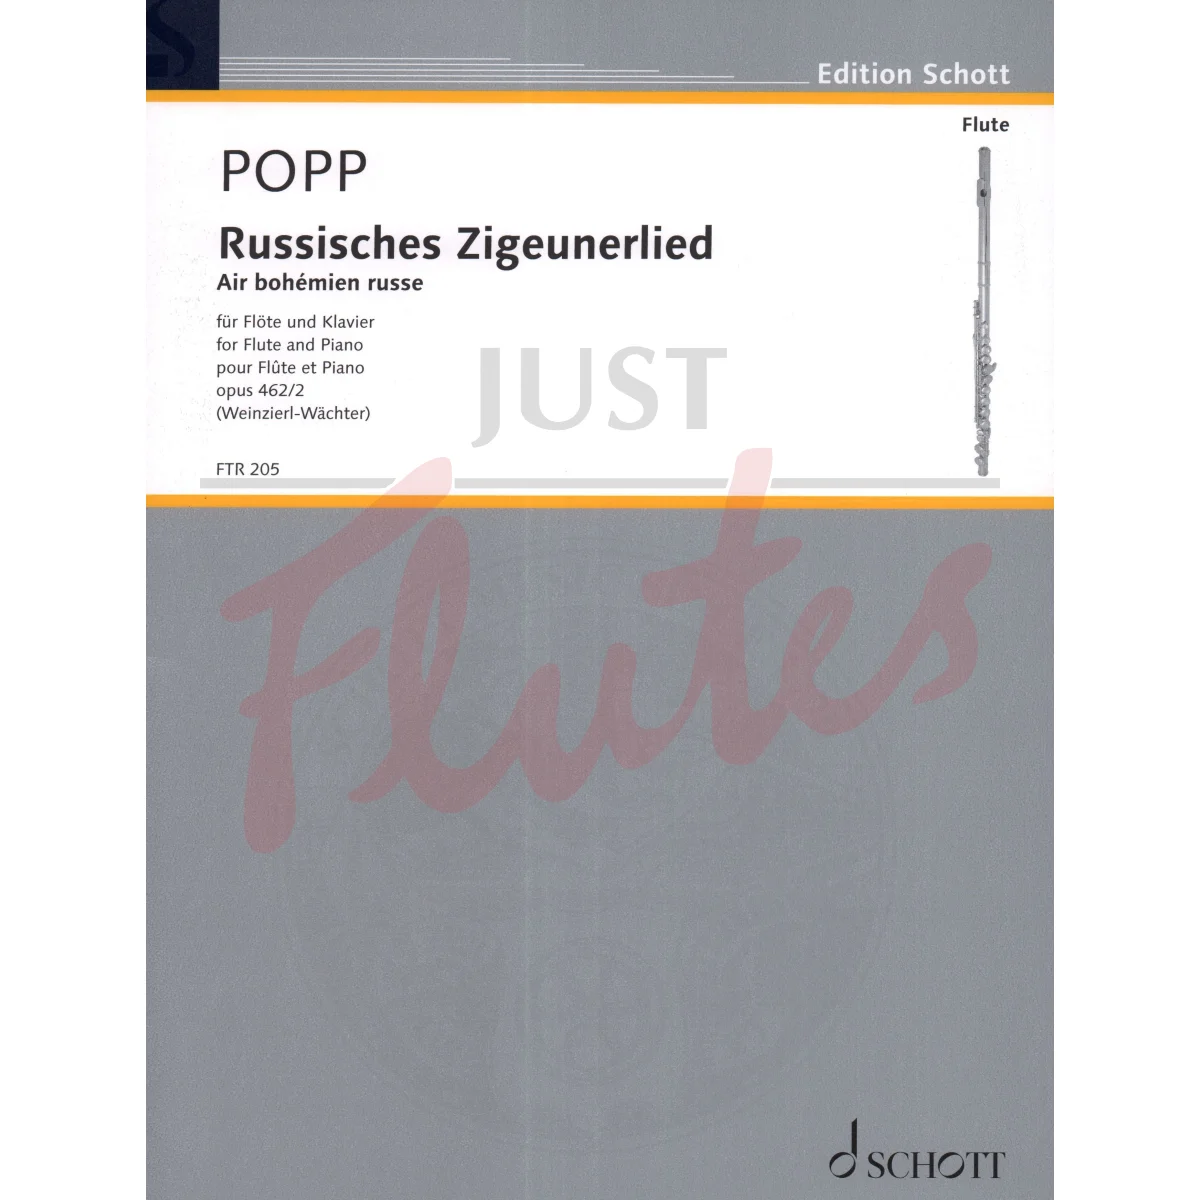 Russisches Zigeunerlied (Air Bohemien Russe) for Flute and Piano